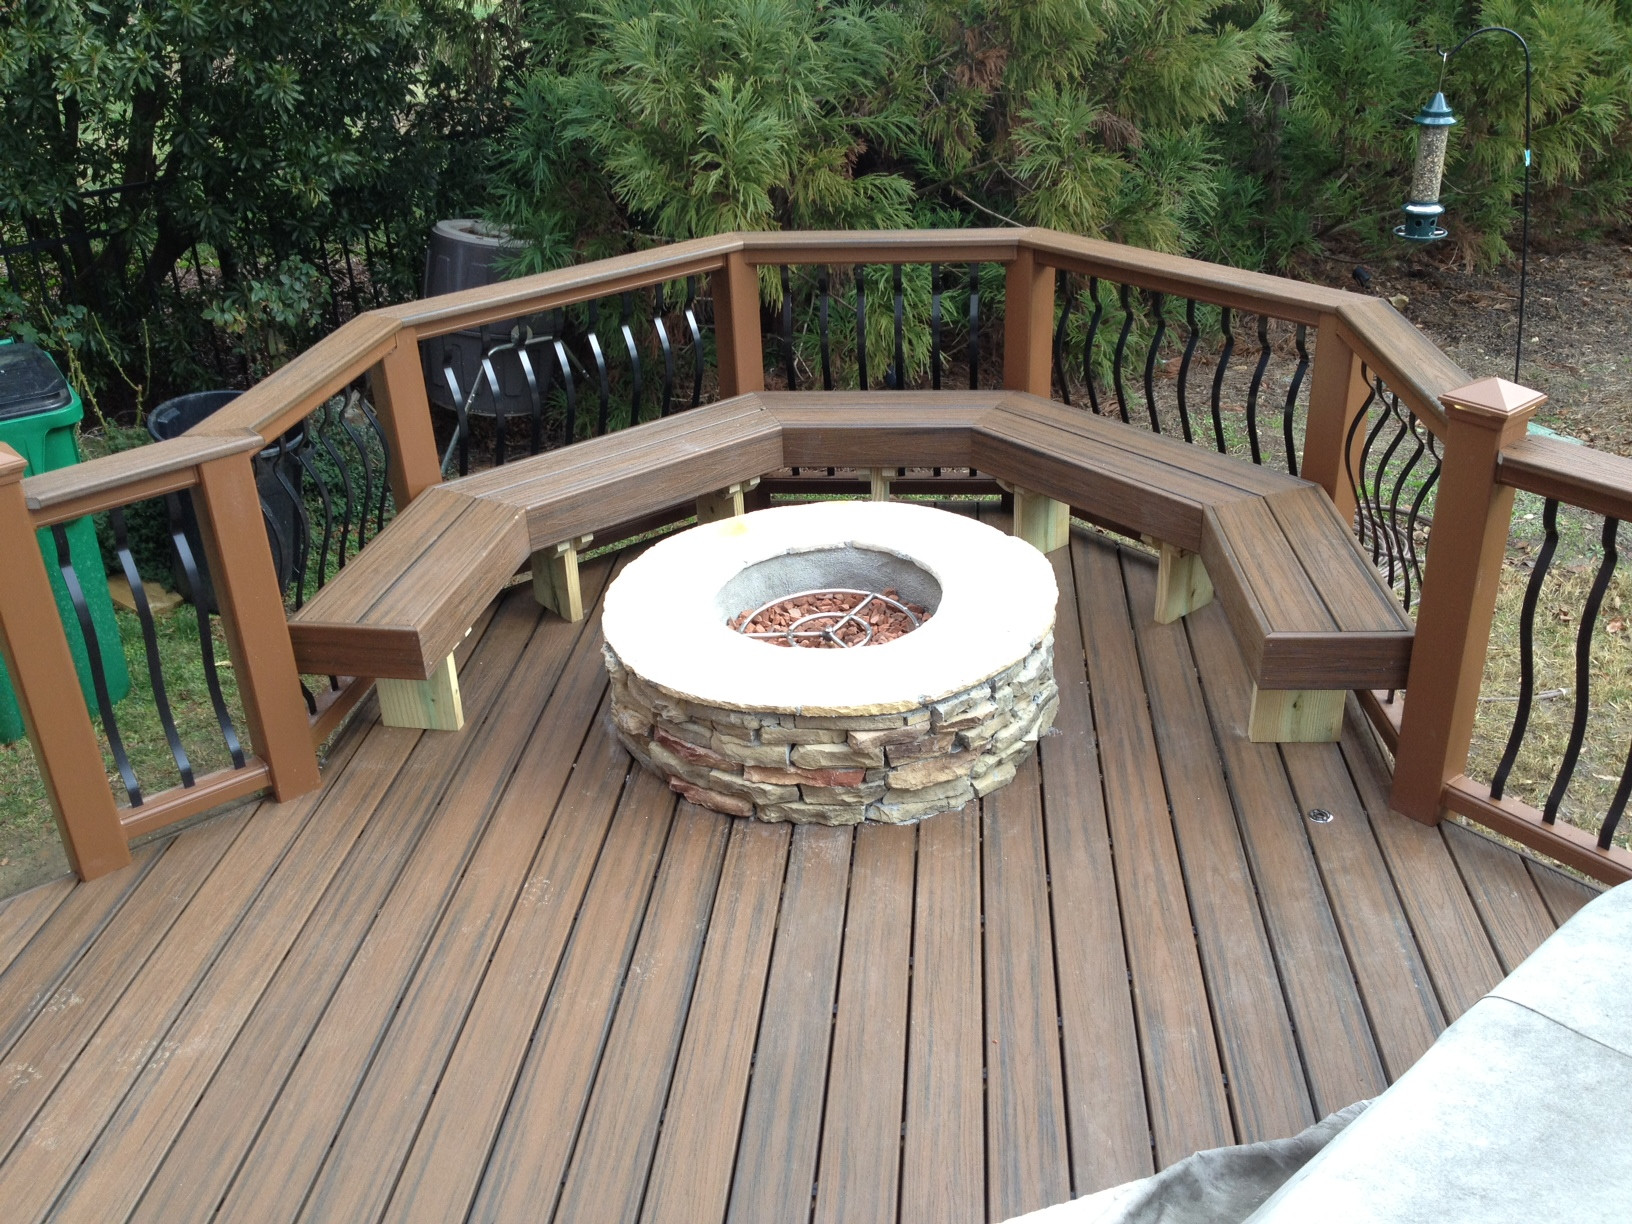 Fire Pit On Wood Deck
 outdoor firepit